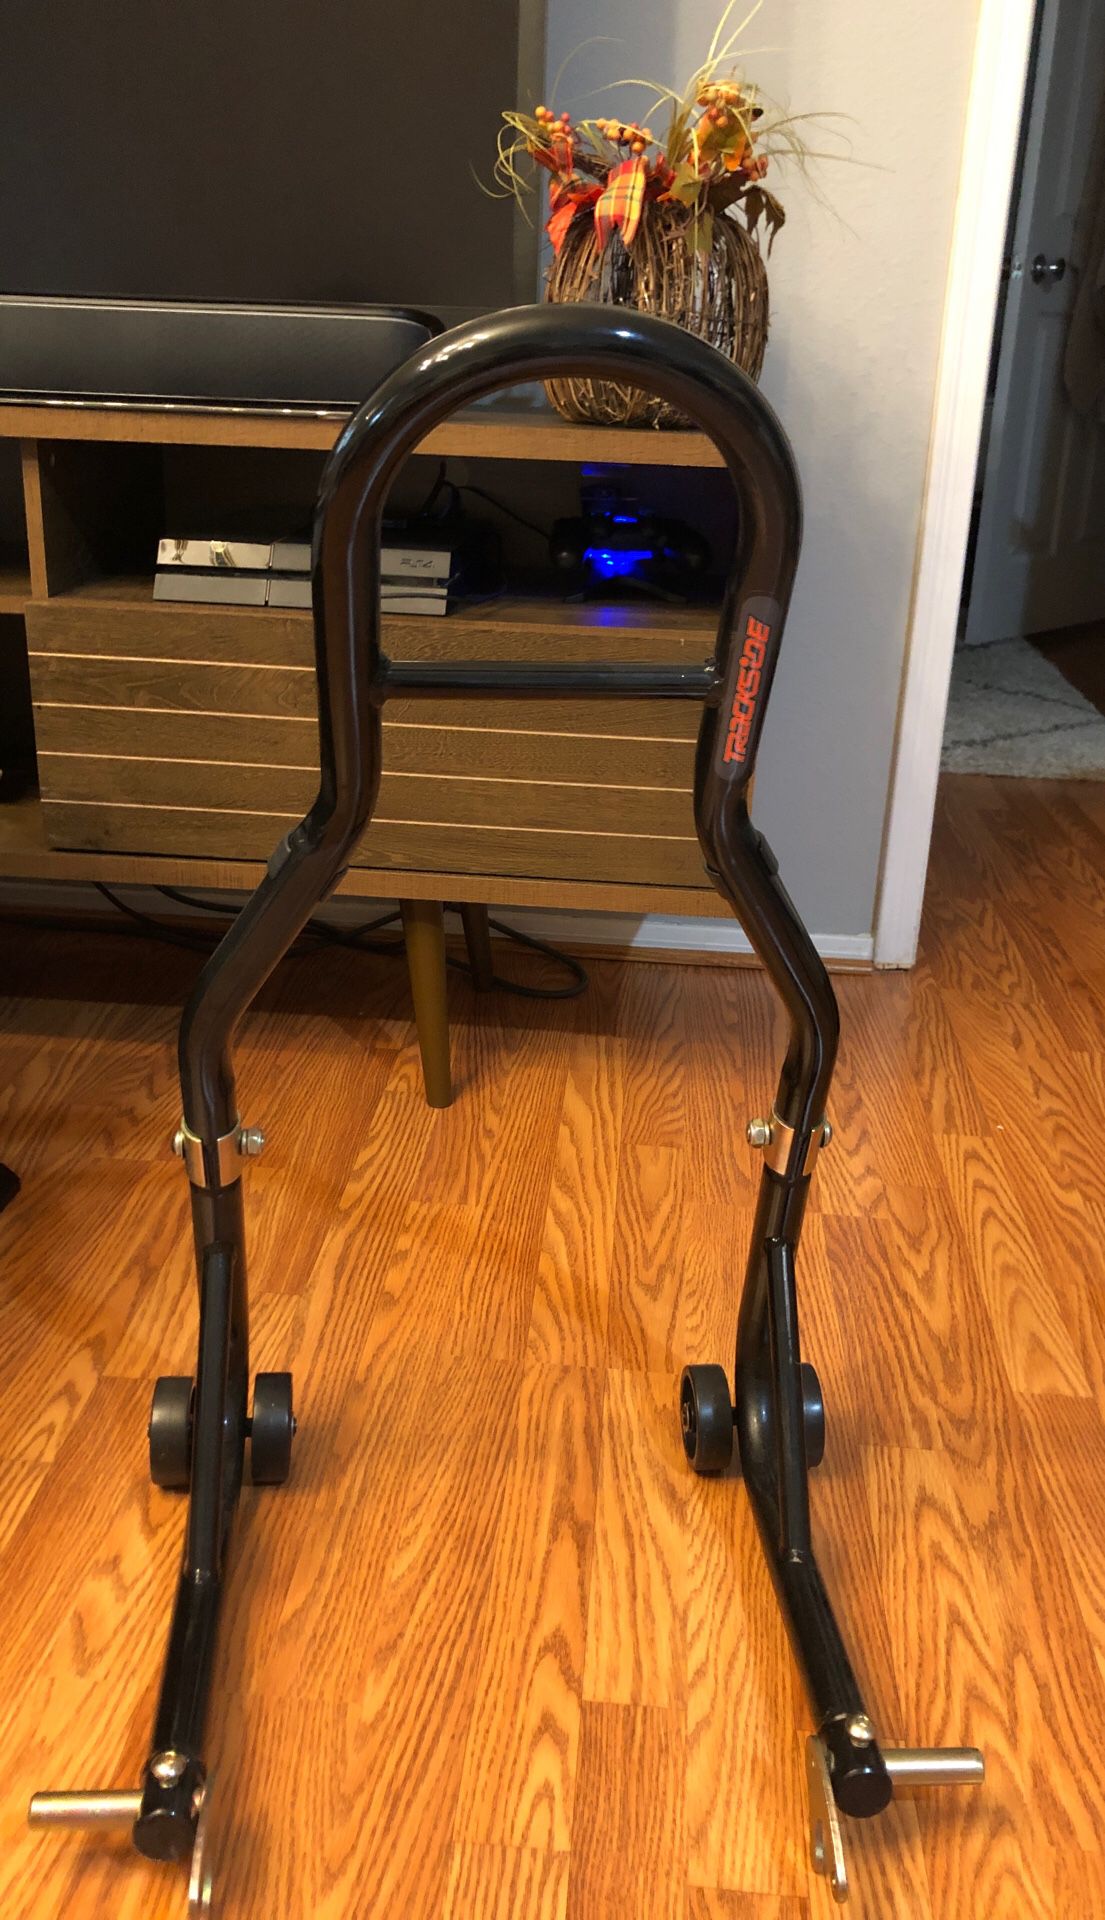 Brand new motorcycle stand